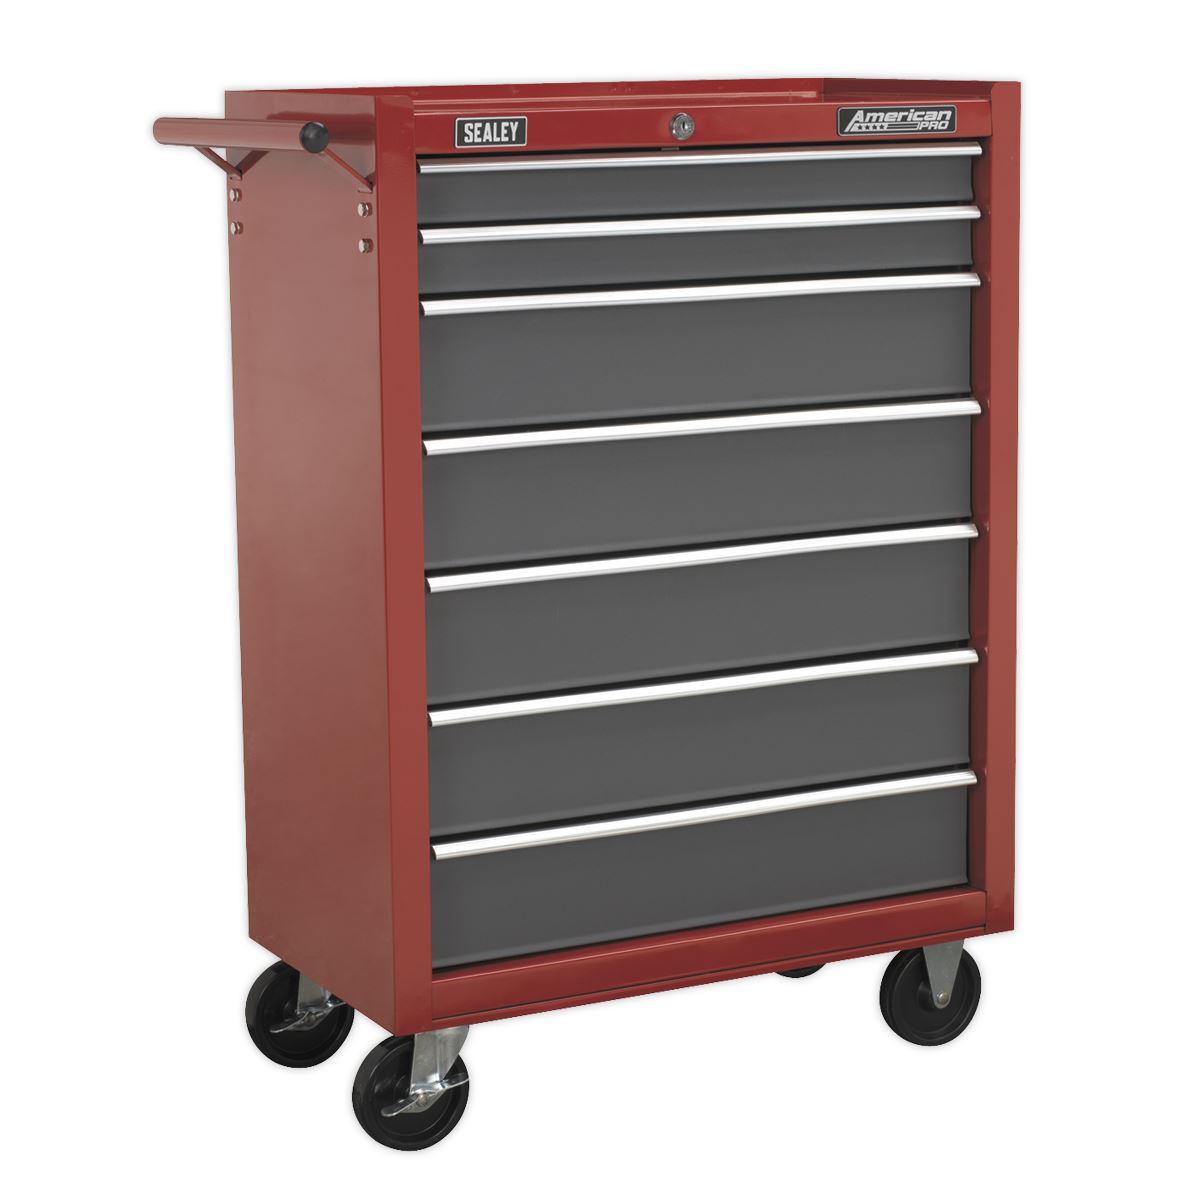 Sealey American Pro Rollcab 7 Drawer with Ball-Bearing Slides - Red/Grey